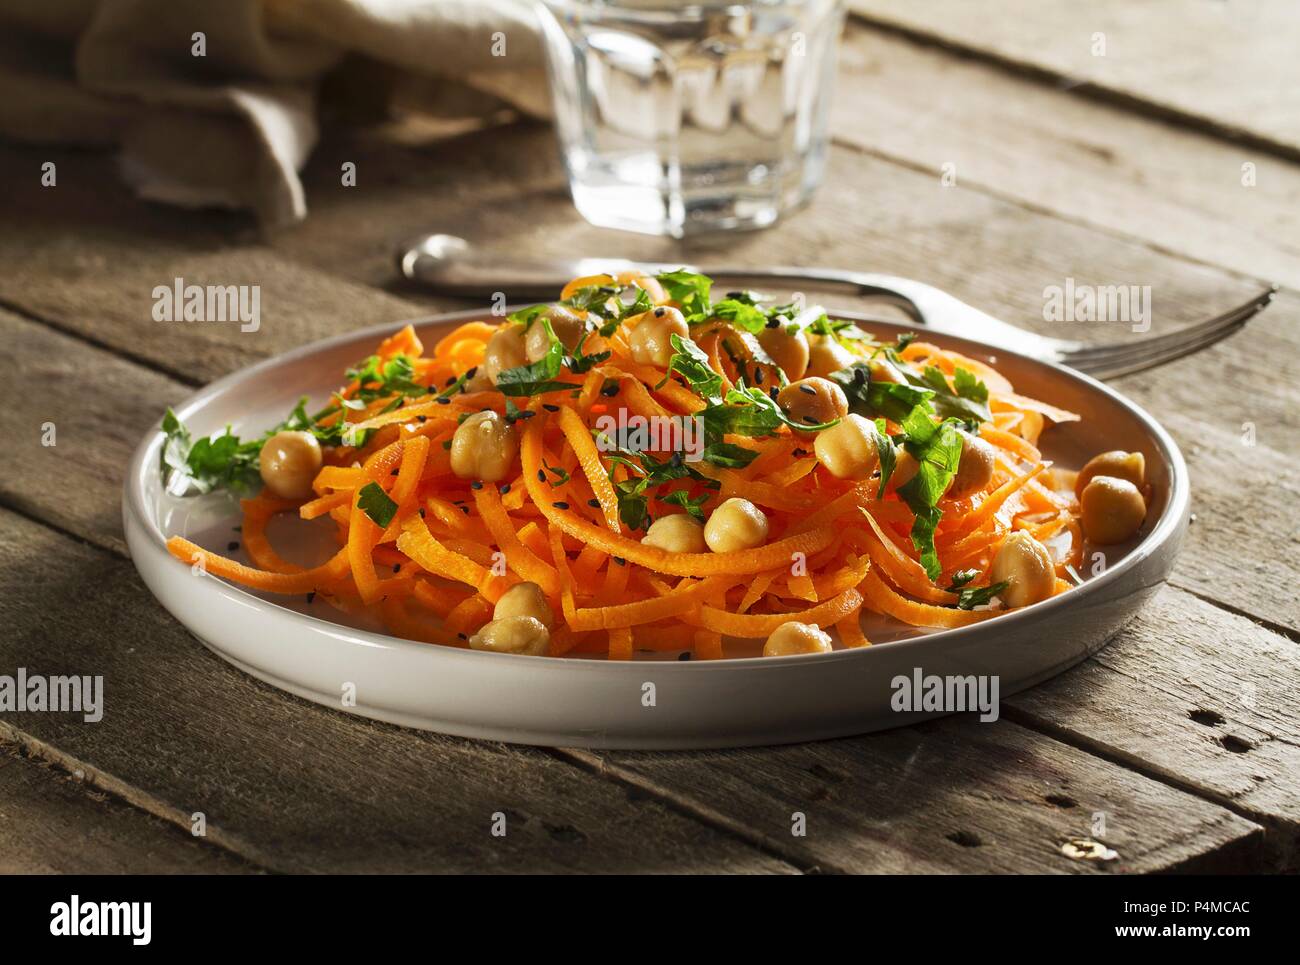 Vegetable salad with carrot, chickpeas and parsley Stock Photo